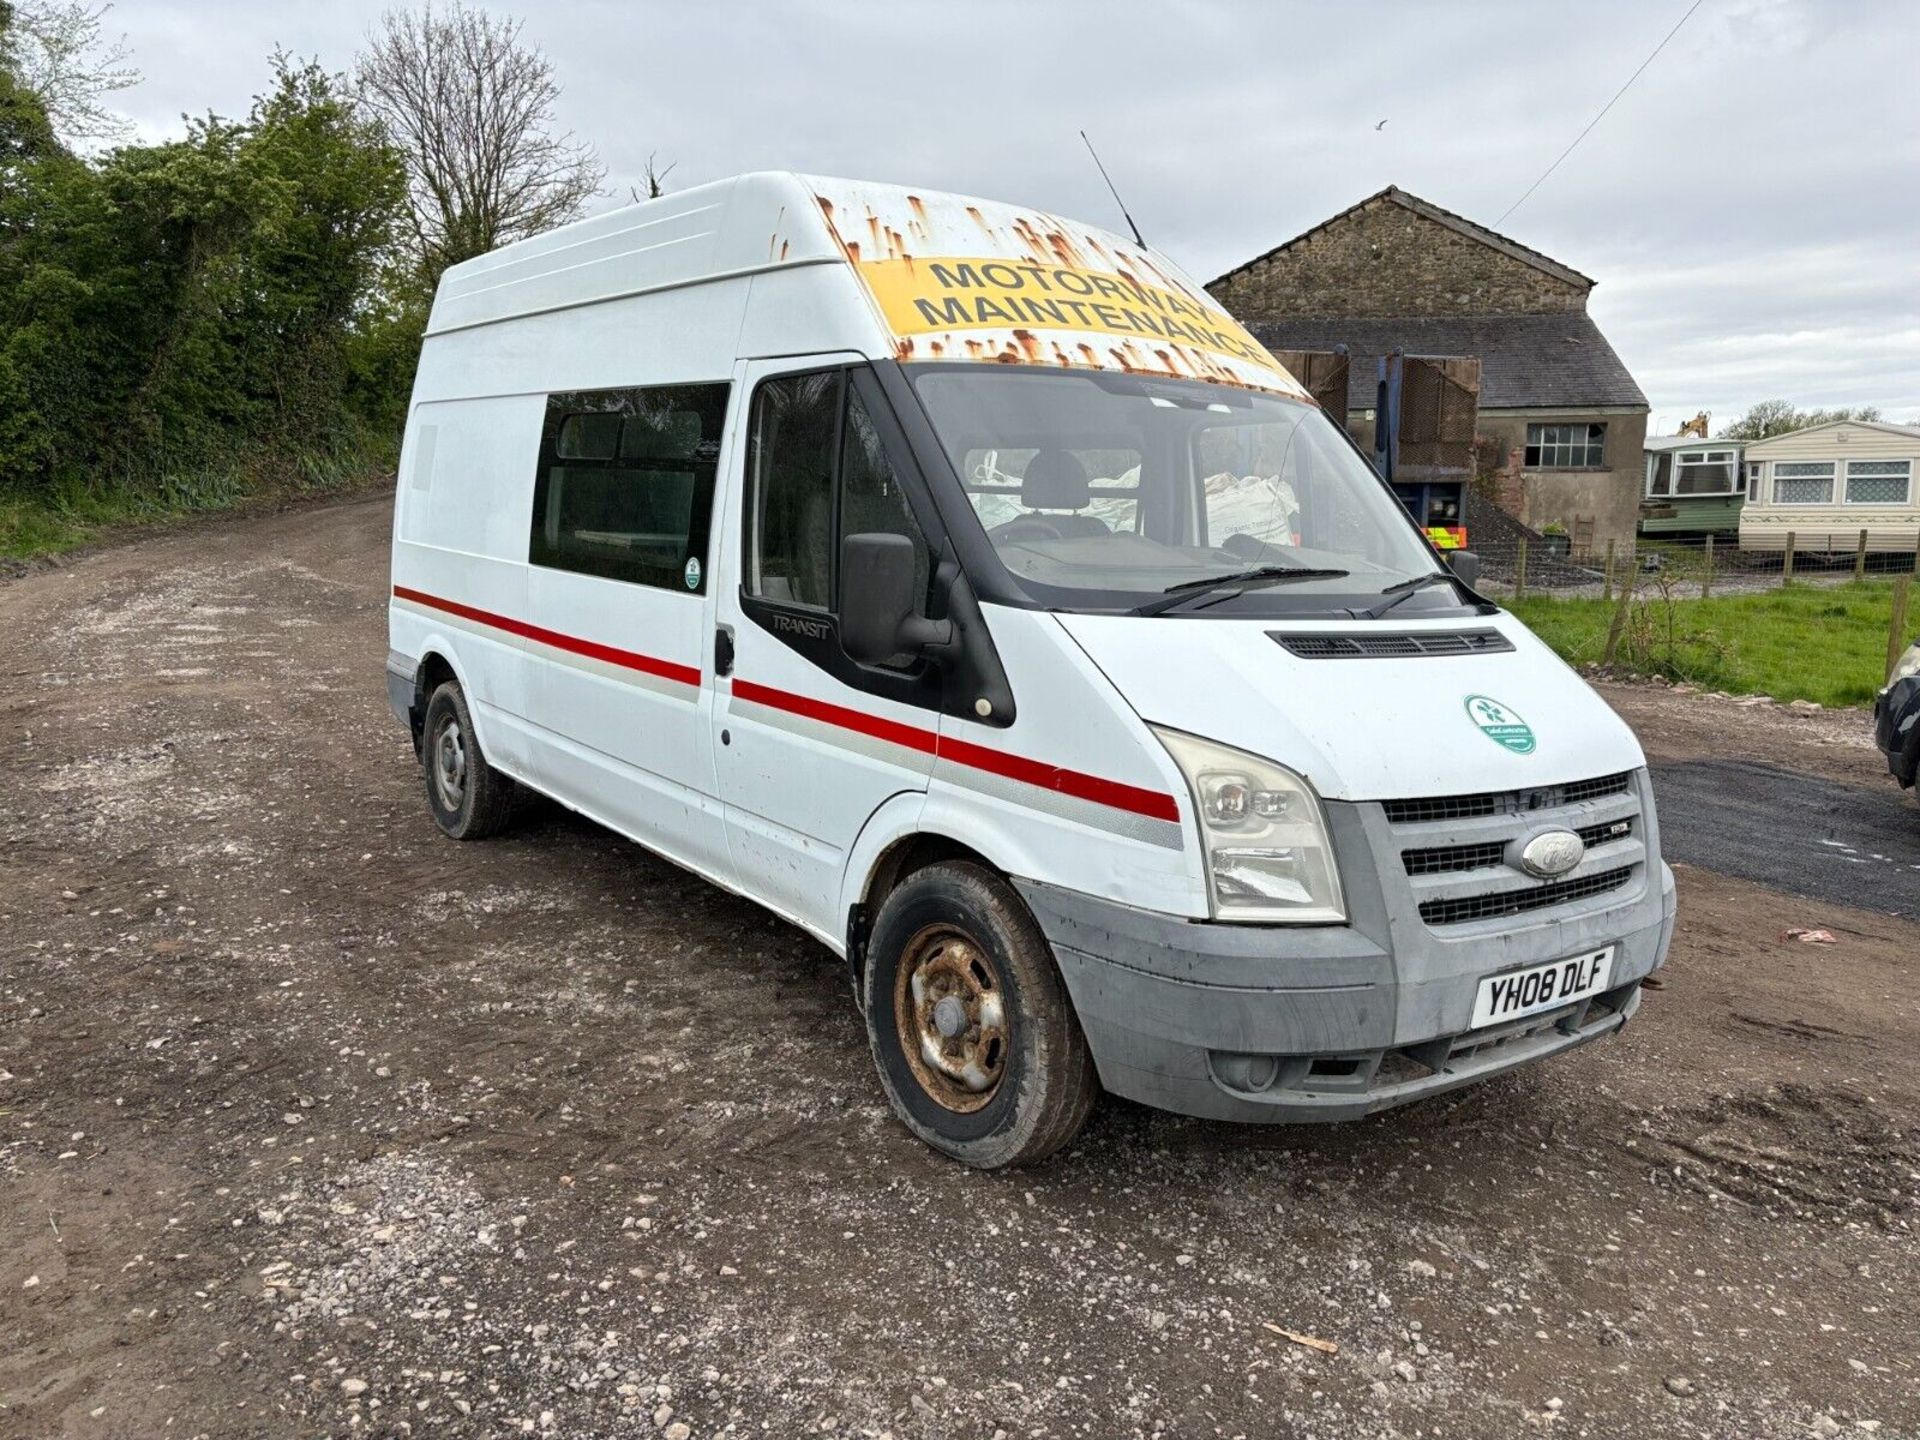 2008 FORD TRANSIT 5 SEAT WELFARE VEHICLE - Image 2 of 18